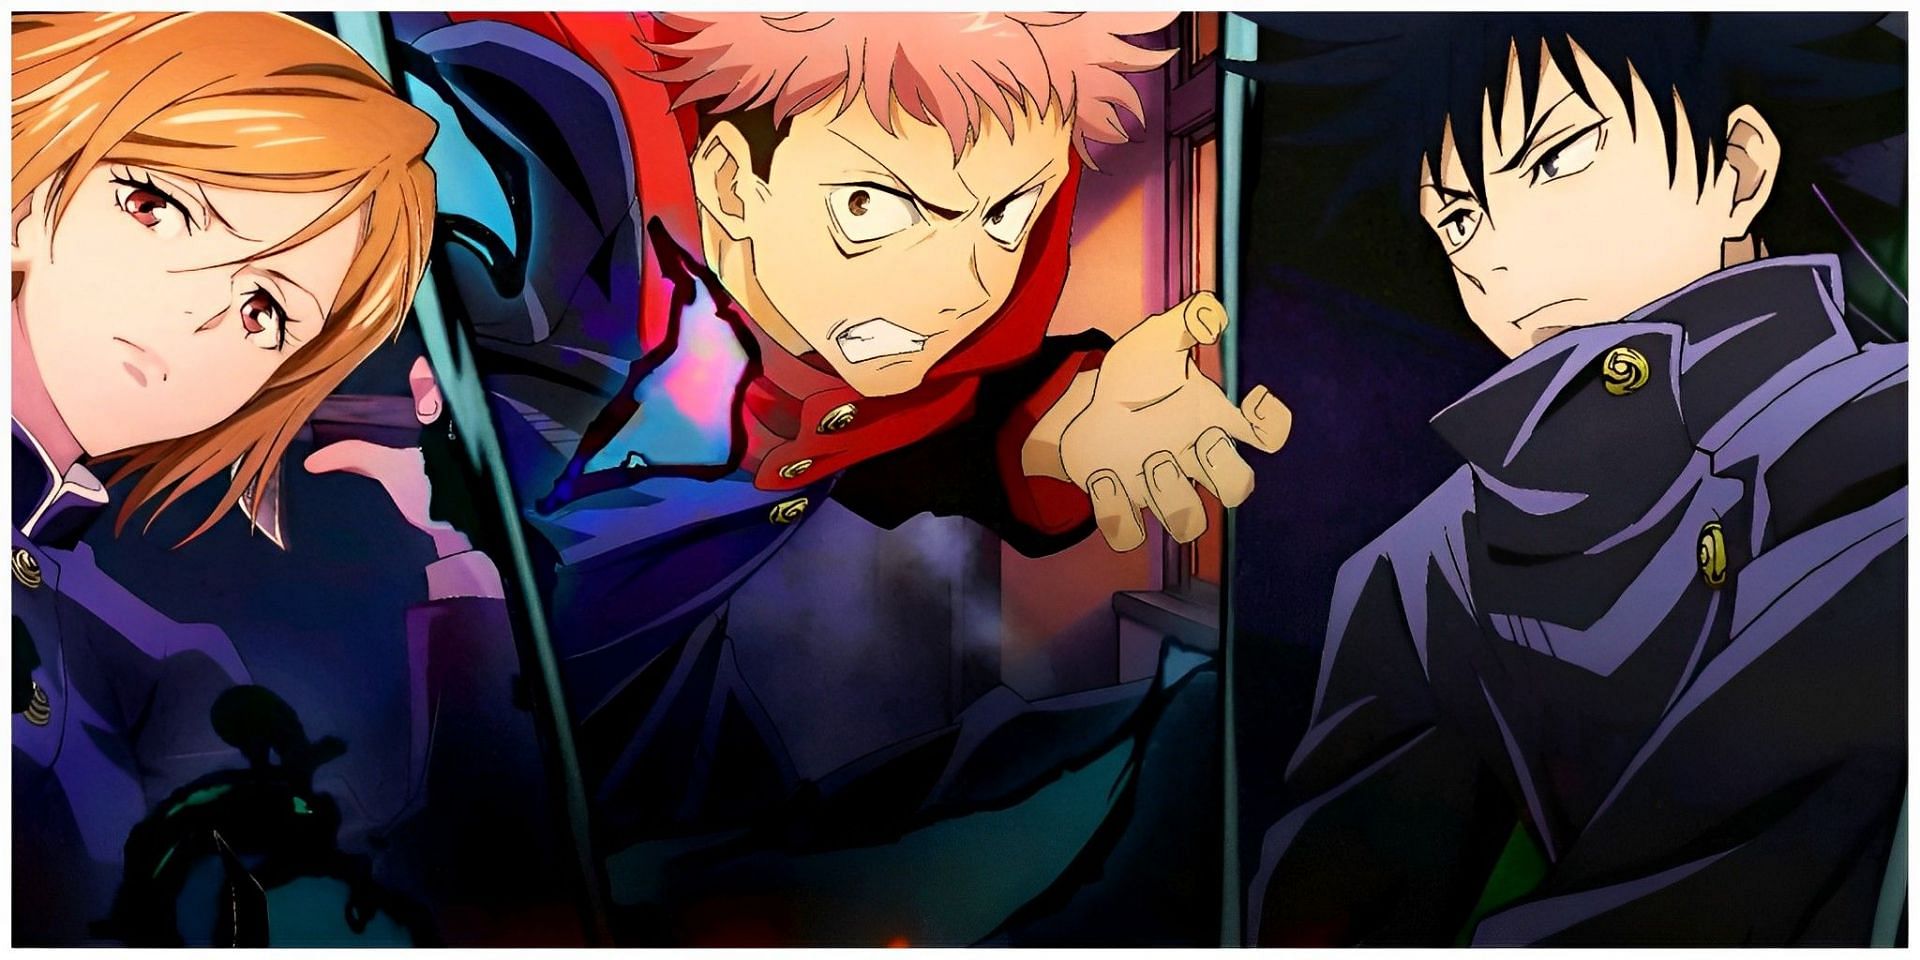 Why are there no Jujutsu Kaisen fillers? Anime adaptation, explained